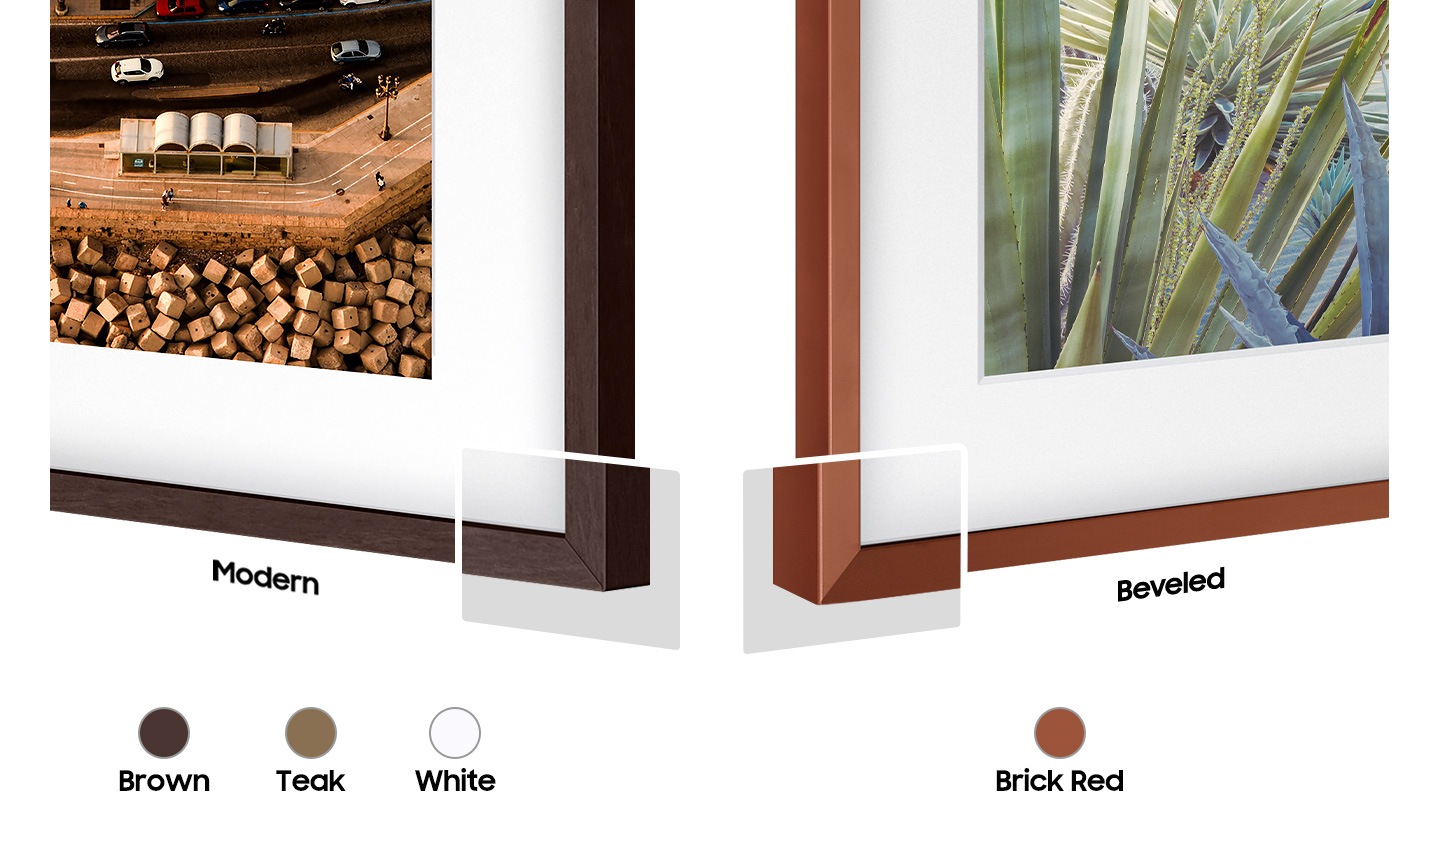 Two bezel types, Modern and Beveled, sit side-by-side to offer users a choice of contemporary or authentic frame style. Colour chips for Brown, Teak, White and Brick Red are shown.